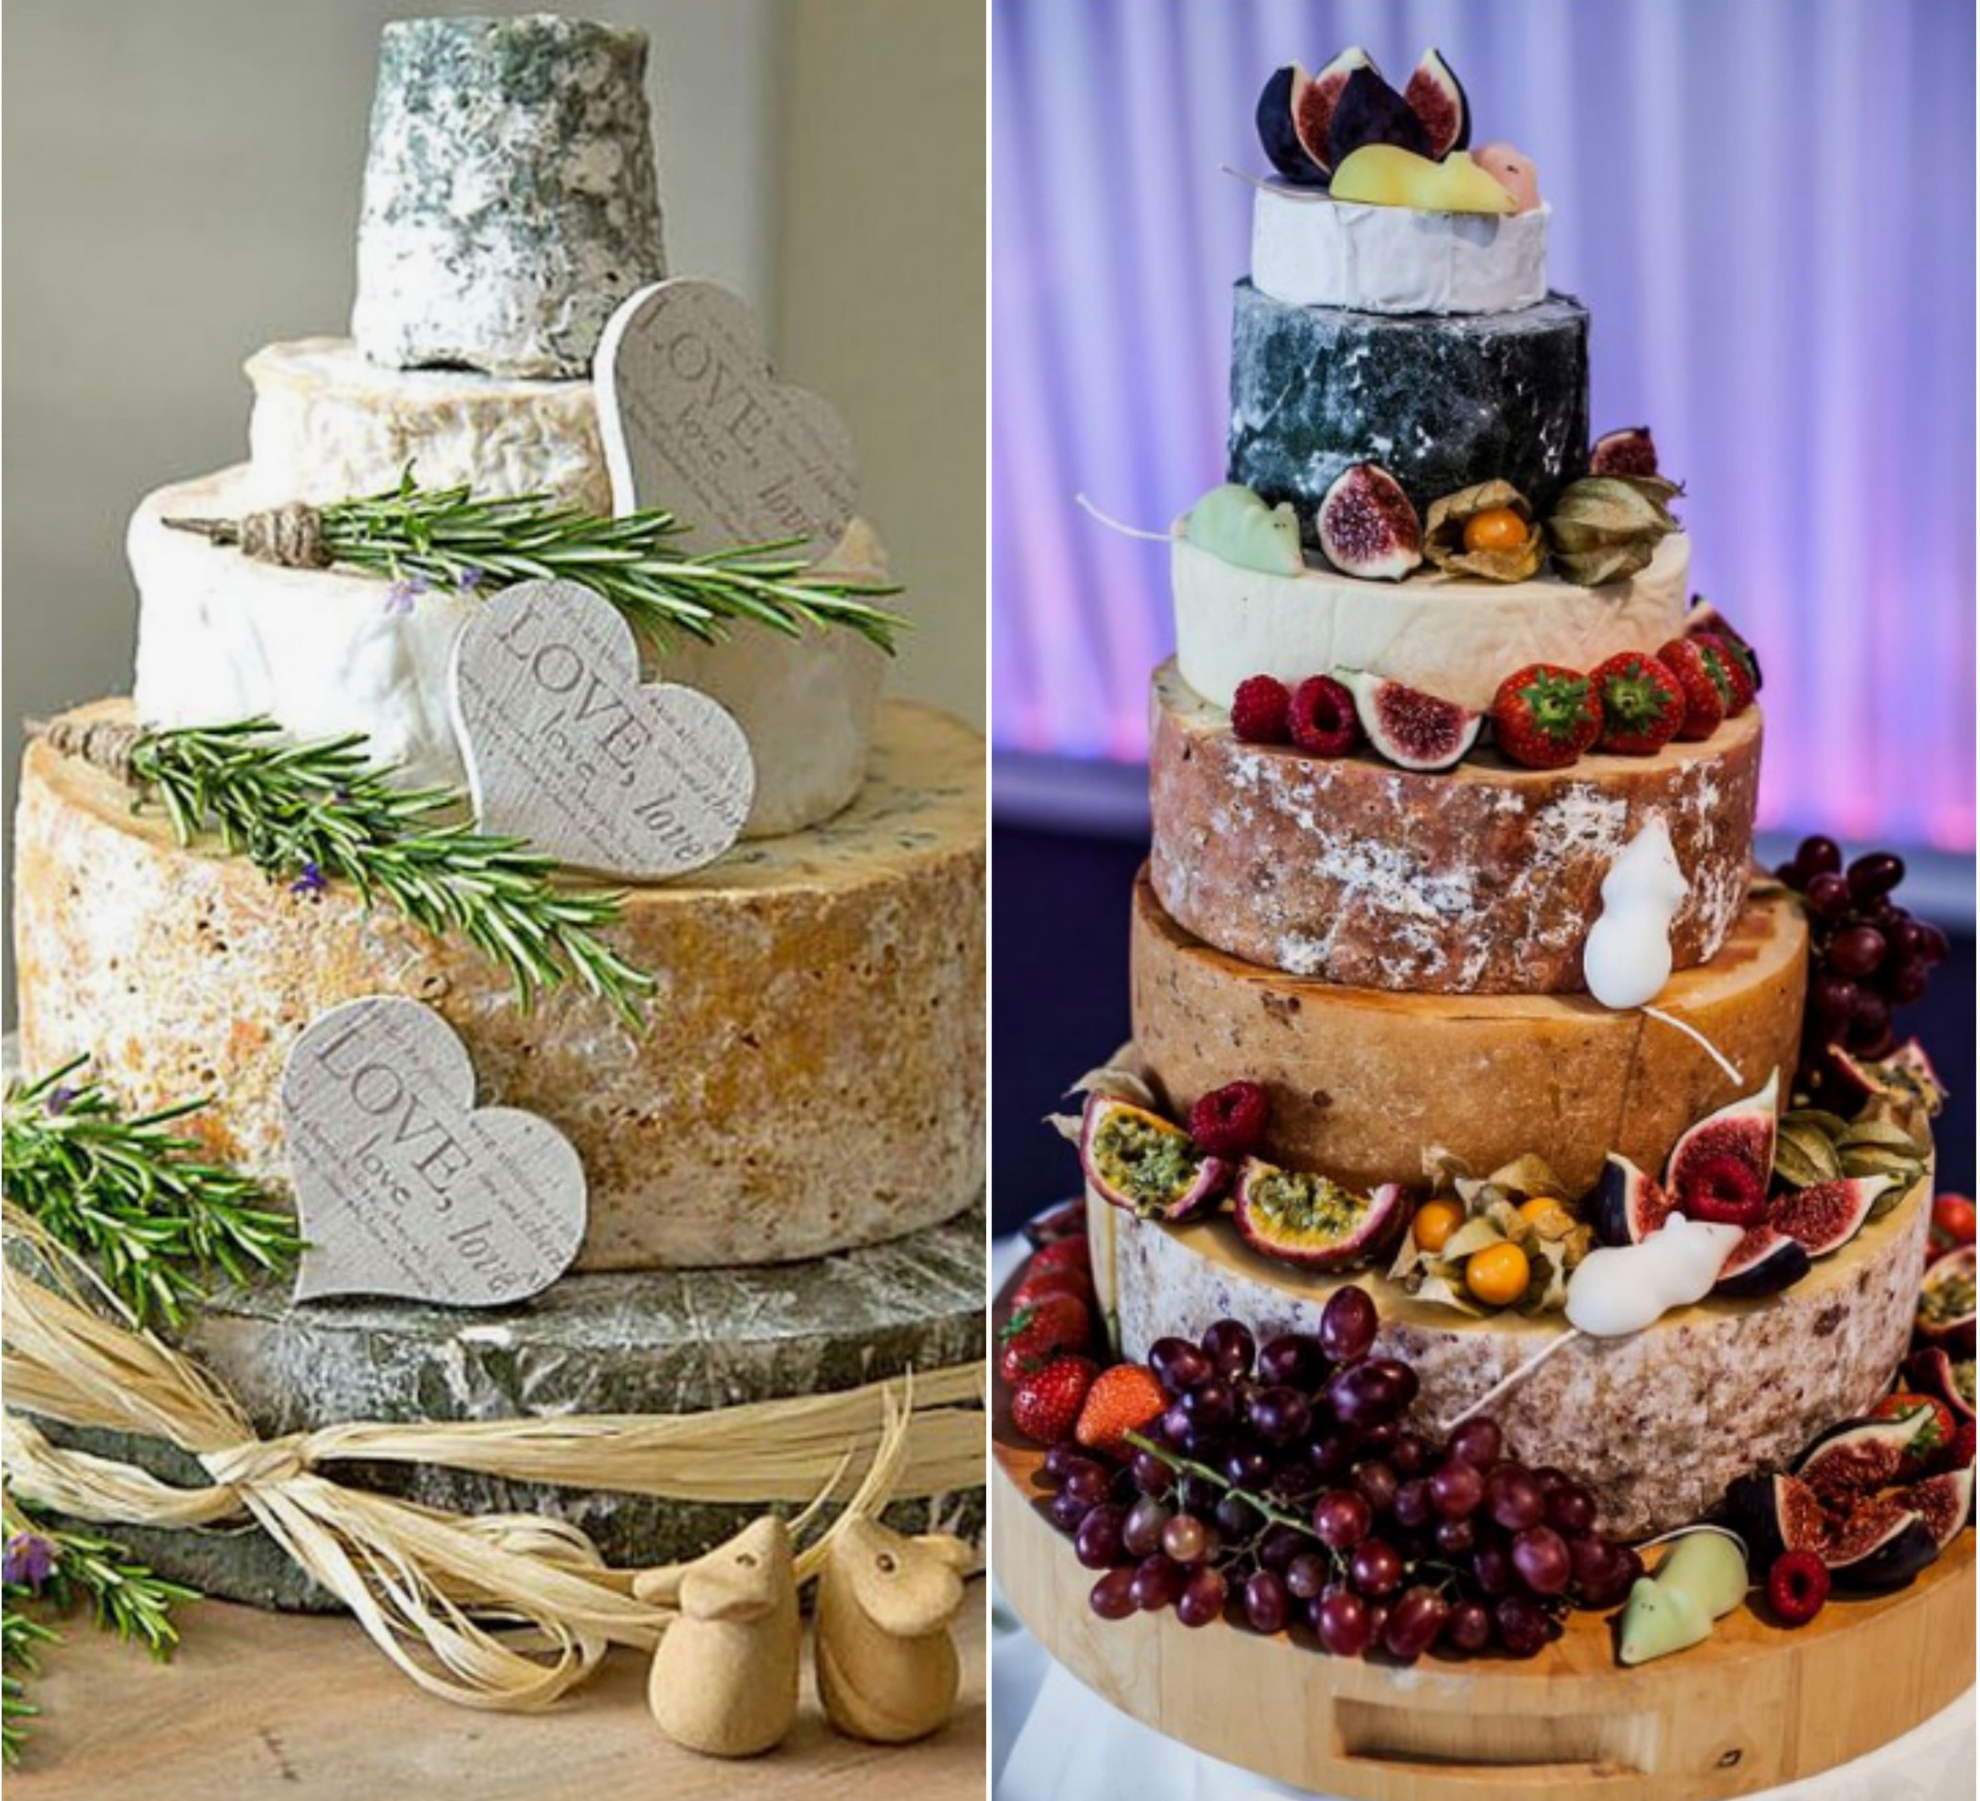 Cheese stack as an alternative to a traditional wedding cake